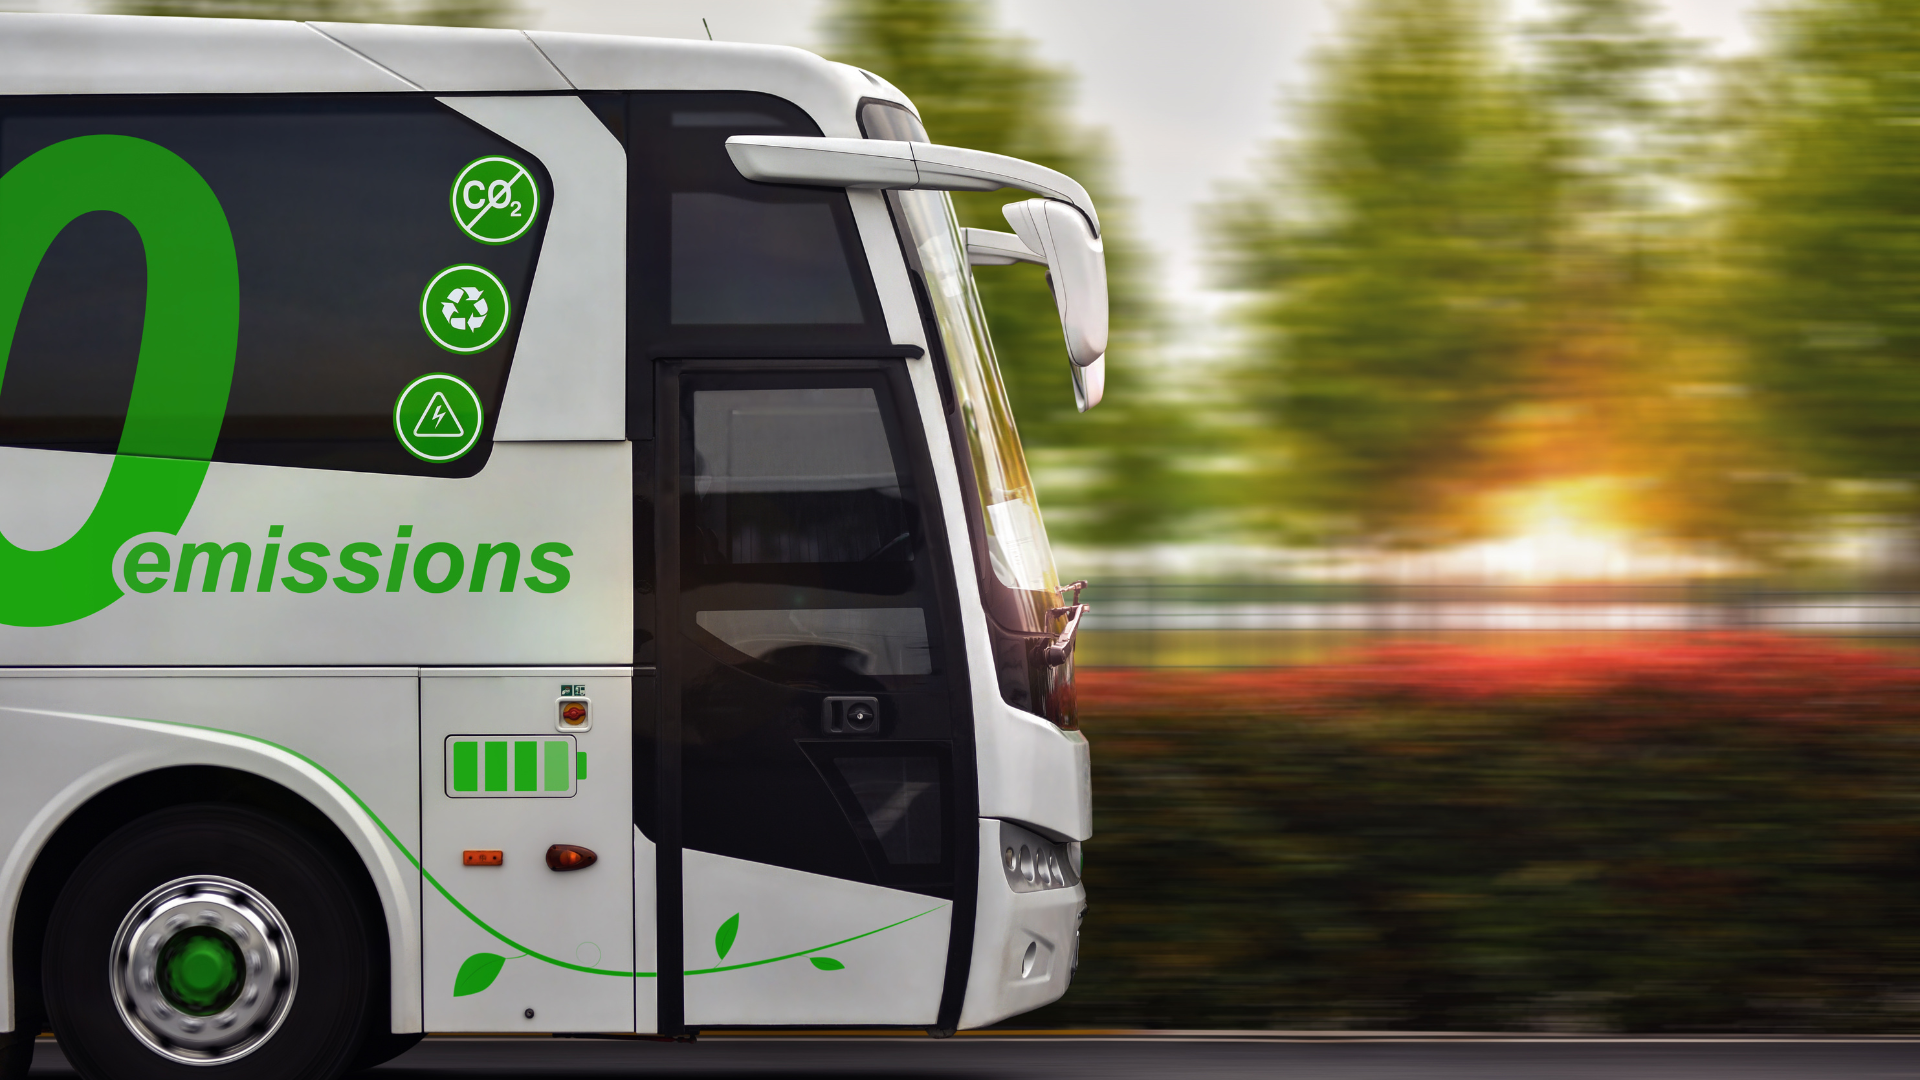 Zero-emission fuel cell electric bus [image courtesy of Canva]